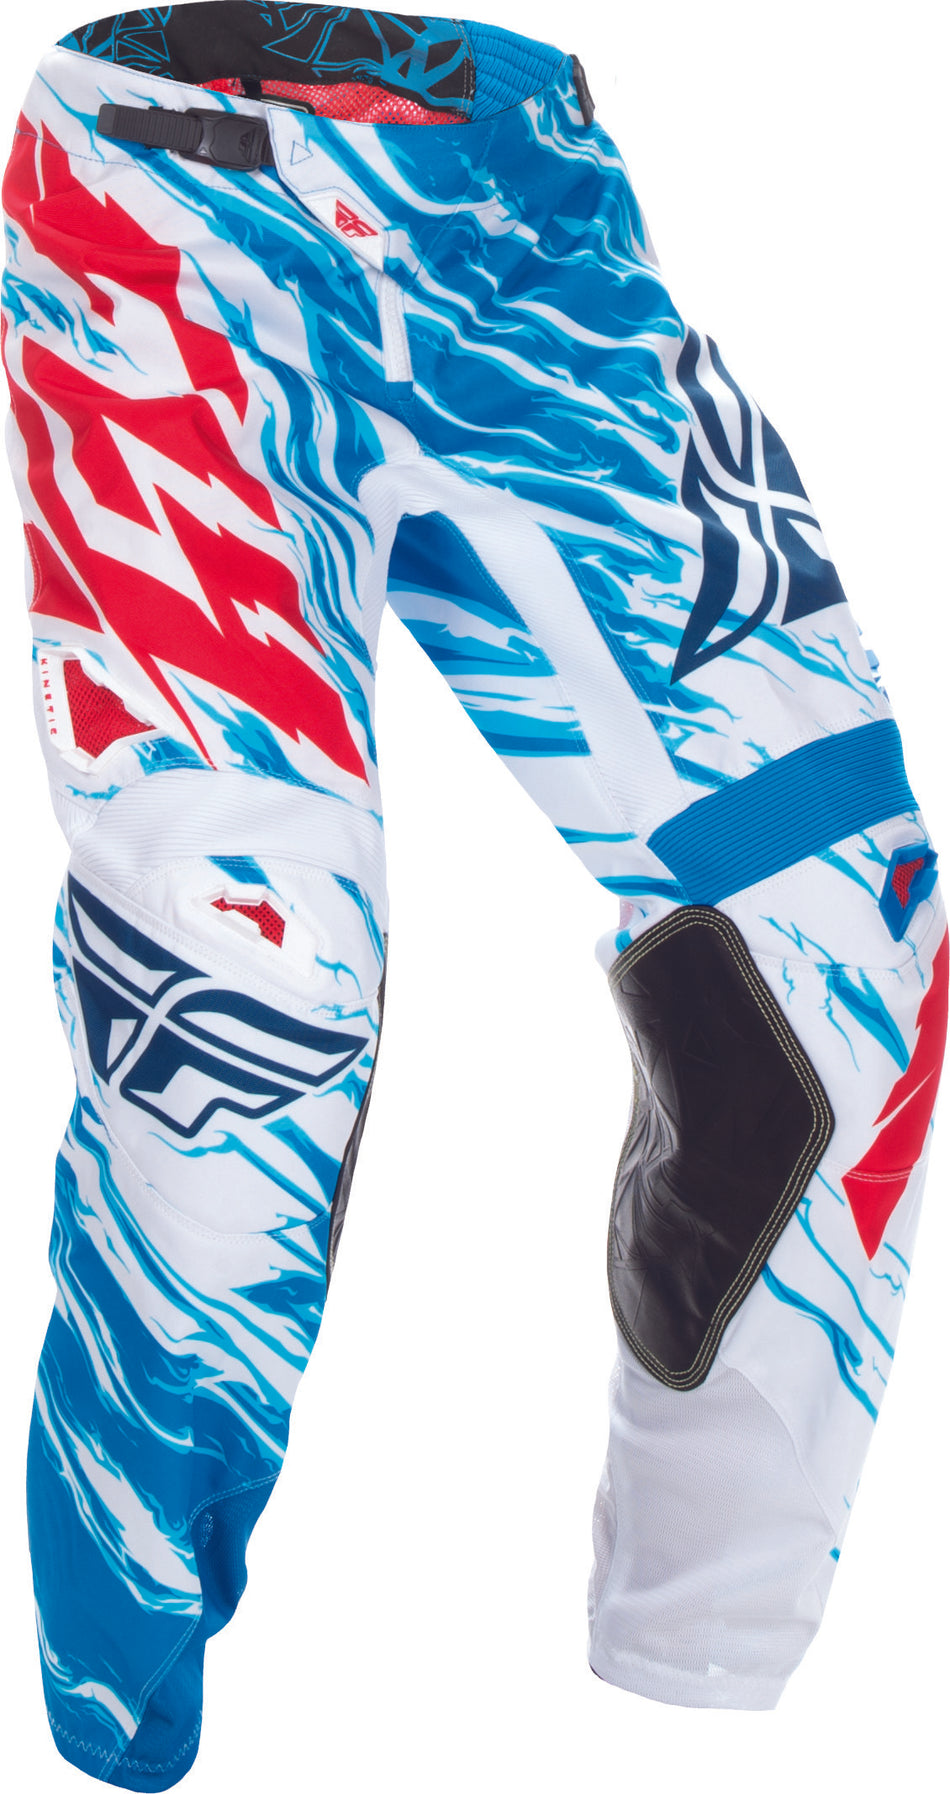 FLY RACING Kinetic Relapse Pant Red/White/Blue Sz 34 370-43234